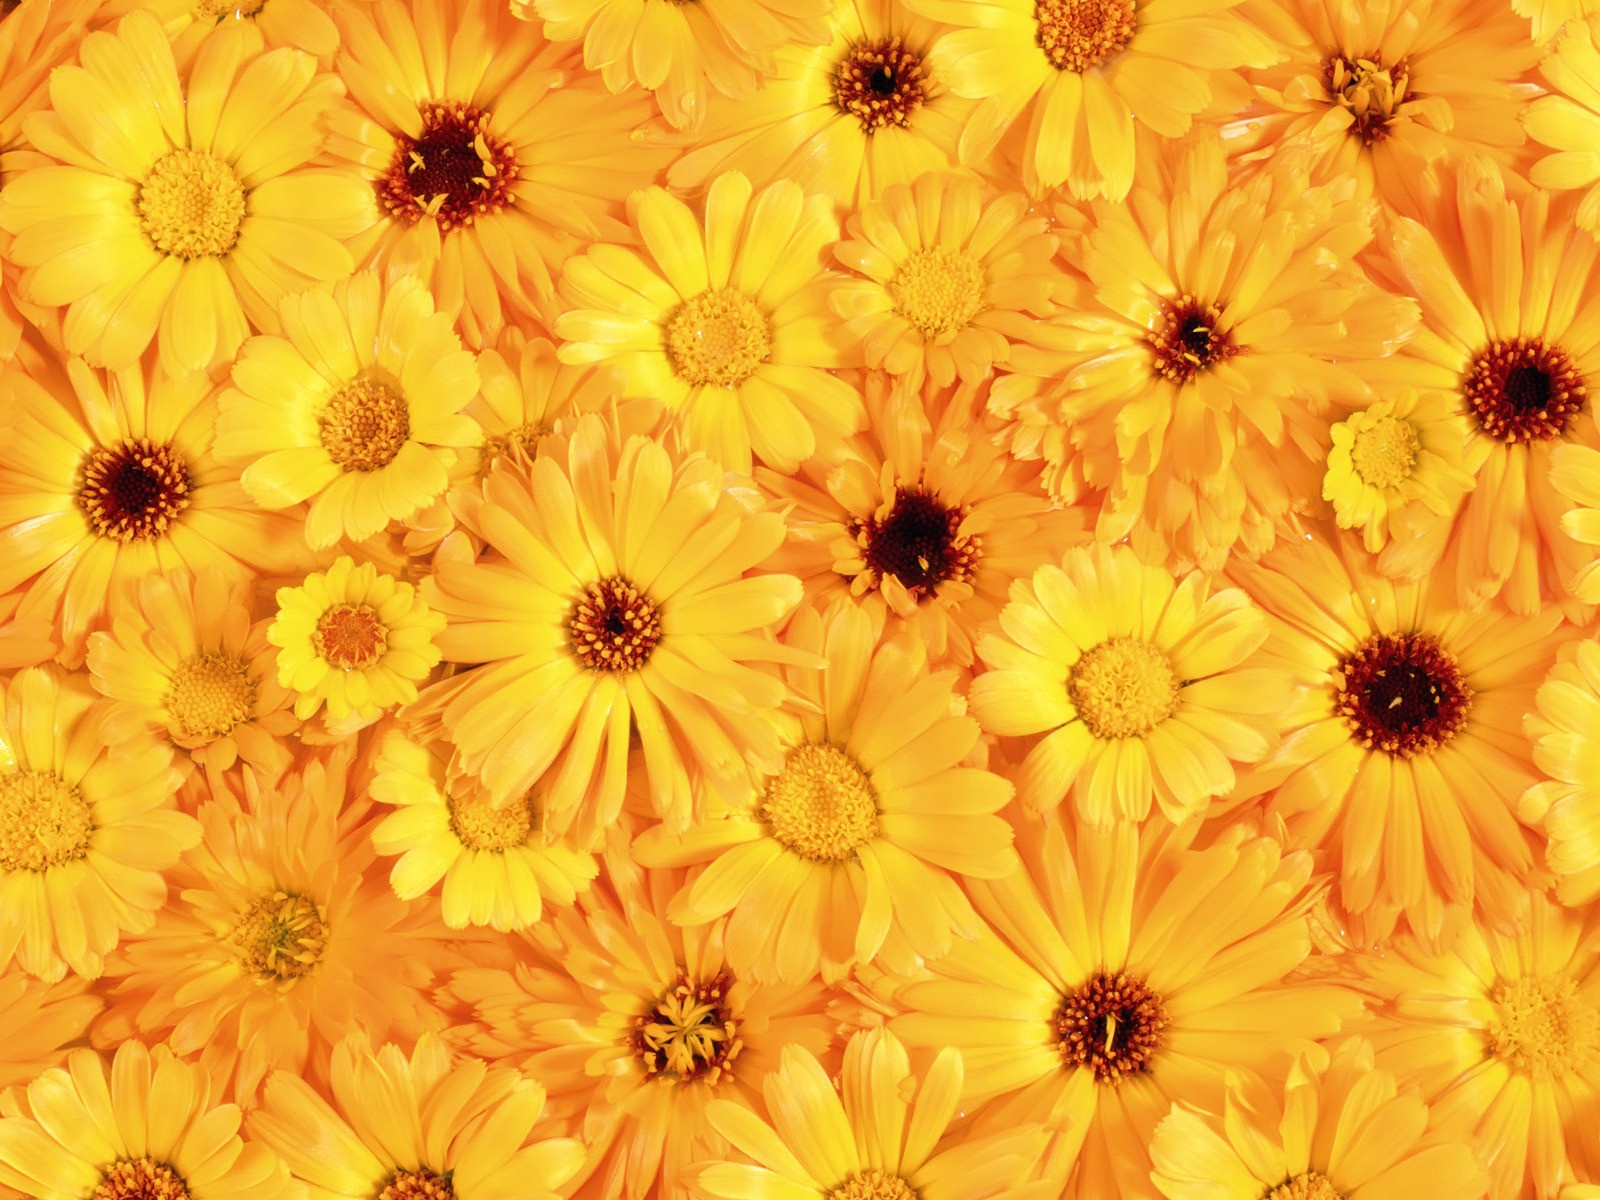 The beautiful yellow flowers wallpapers and images - wallpapers ...